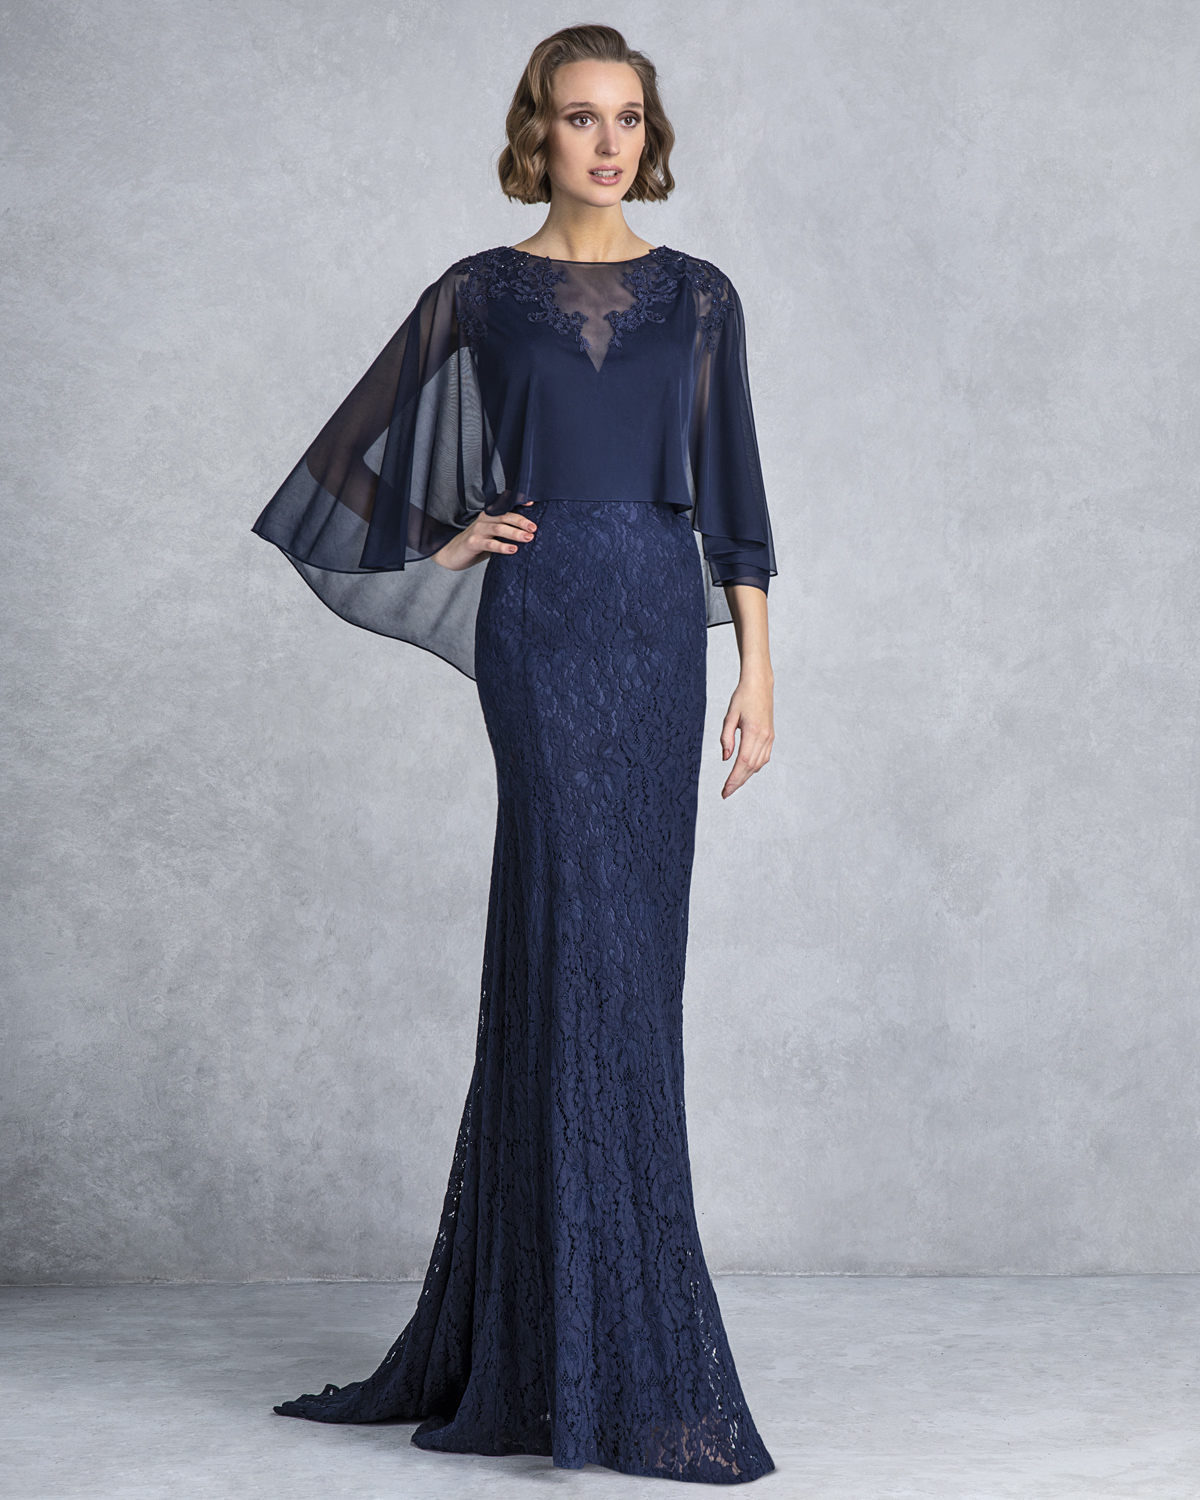 Classic Dresses / Long evening dress with lace skirt and cape